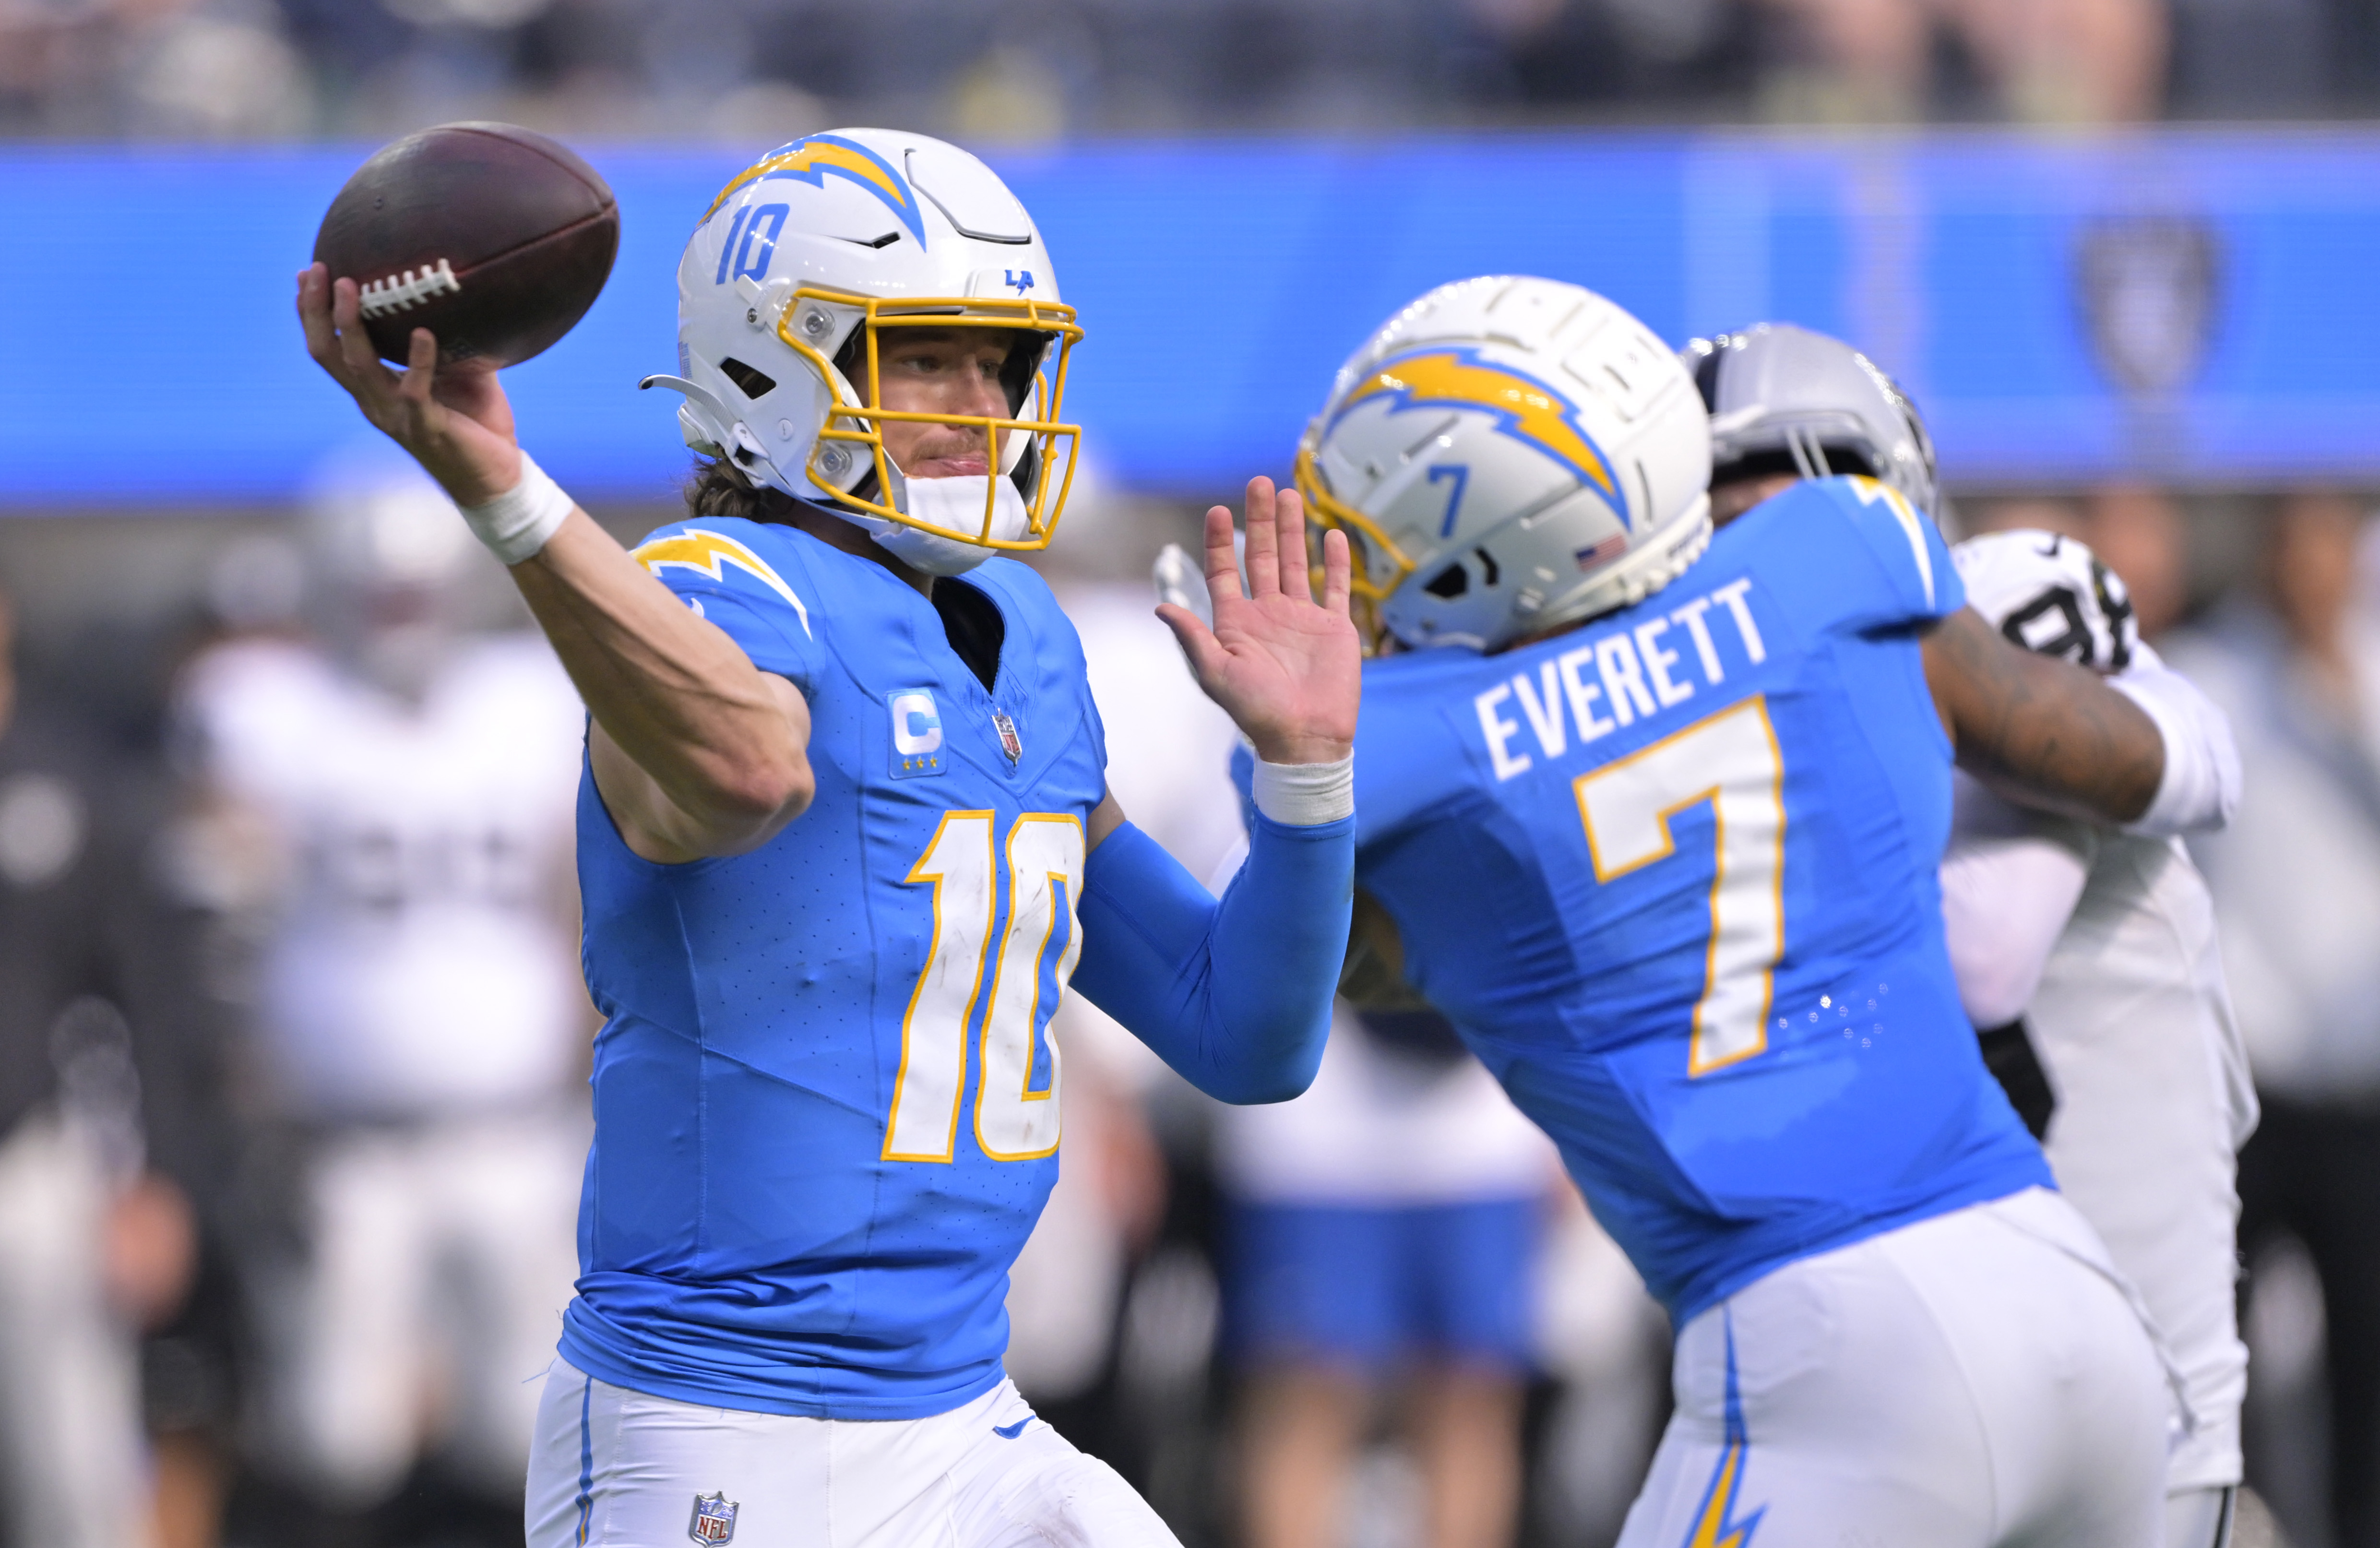 Sunday Night Football' Sacks L.A. Rams-L.A. Chargers Game January